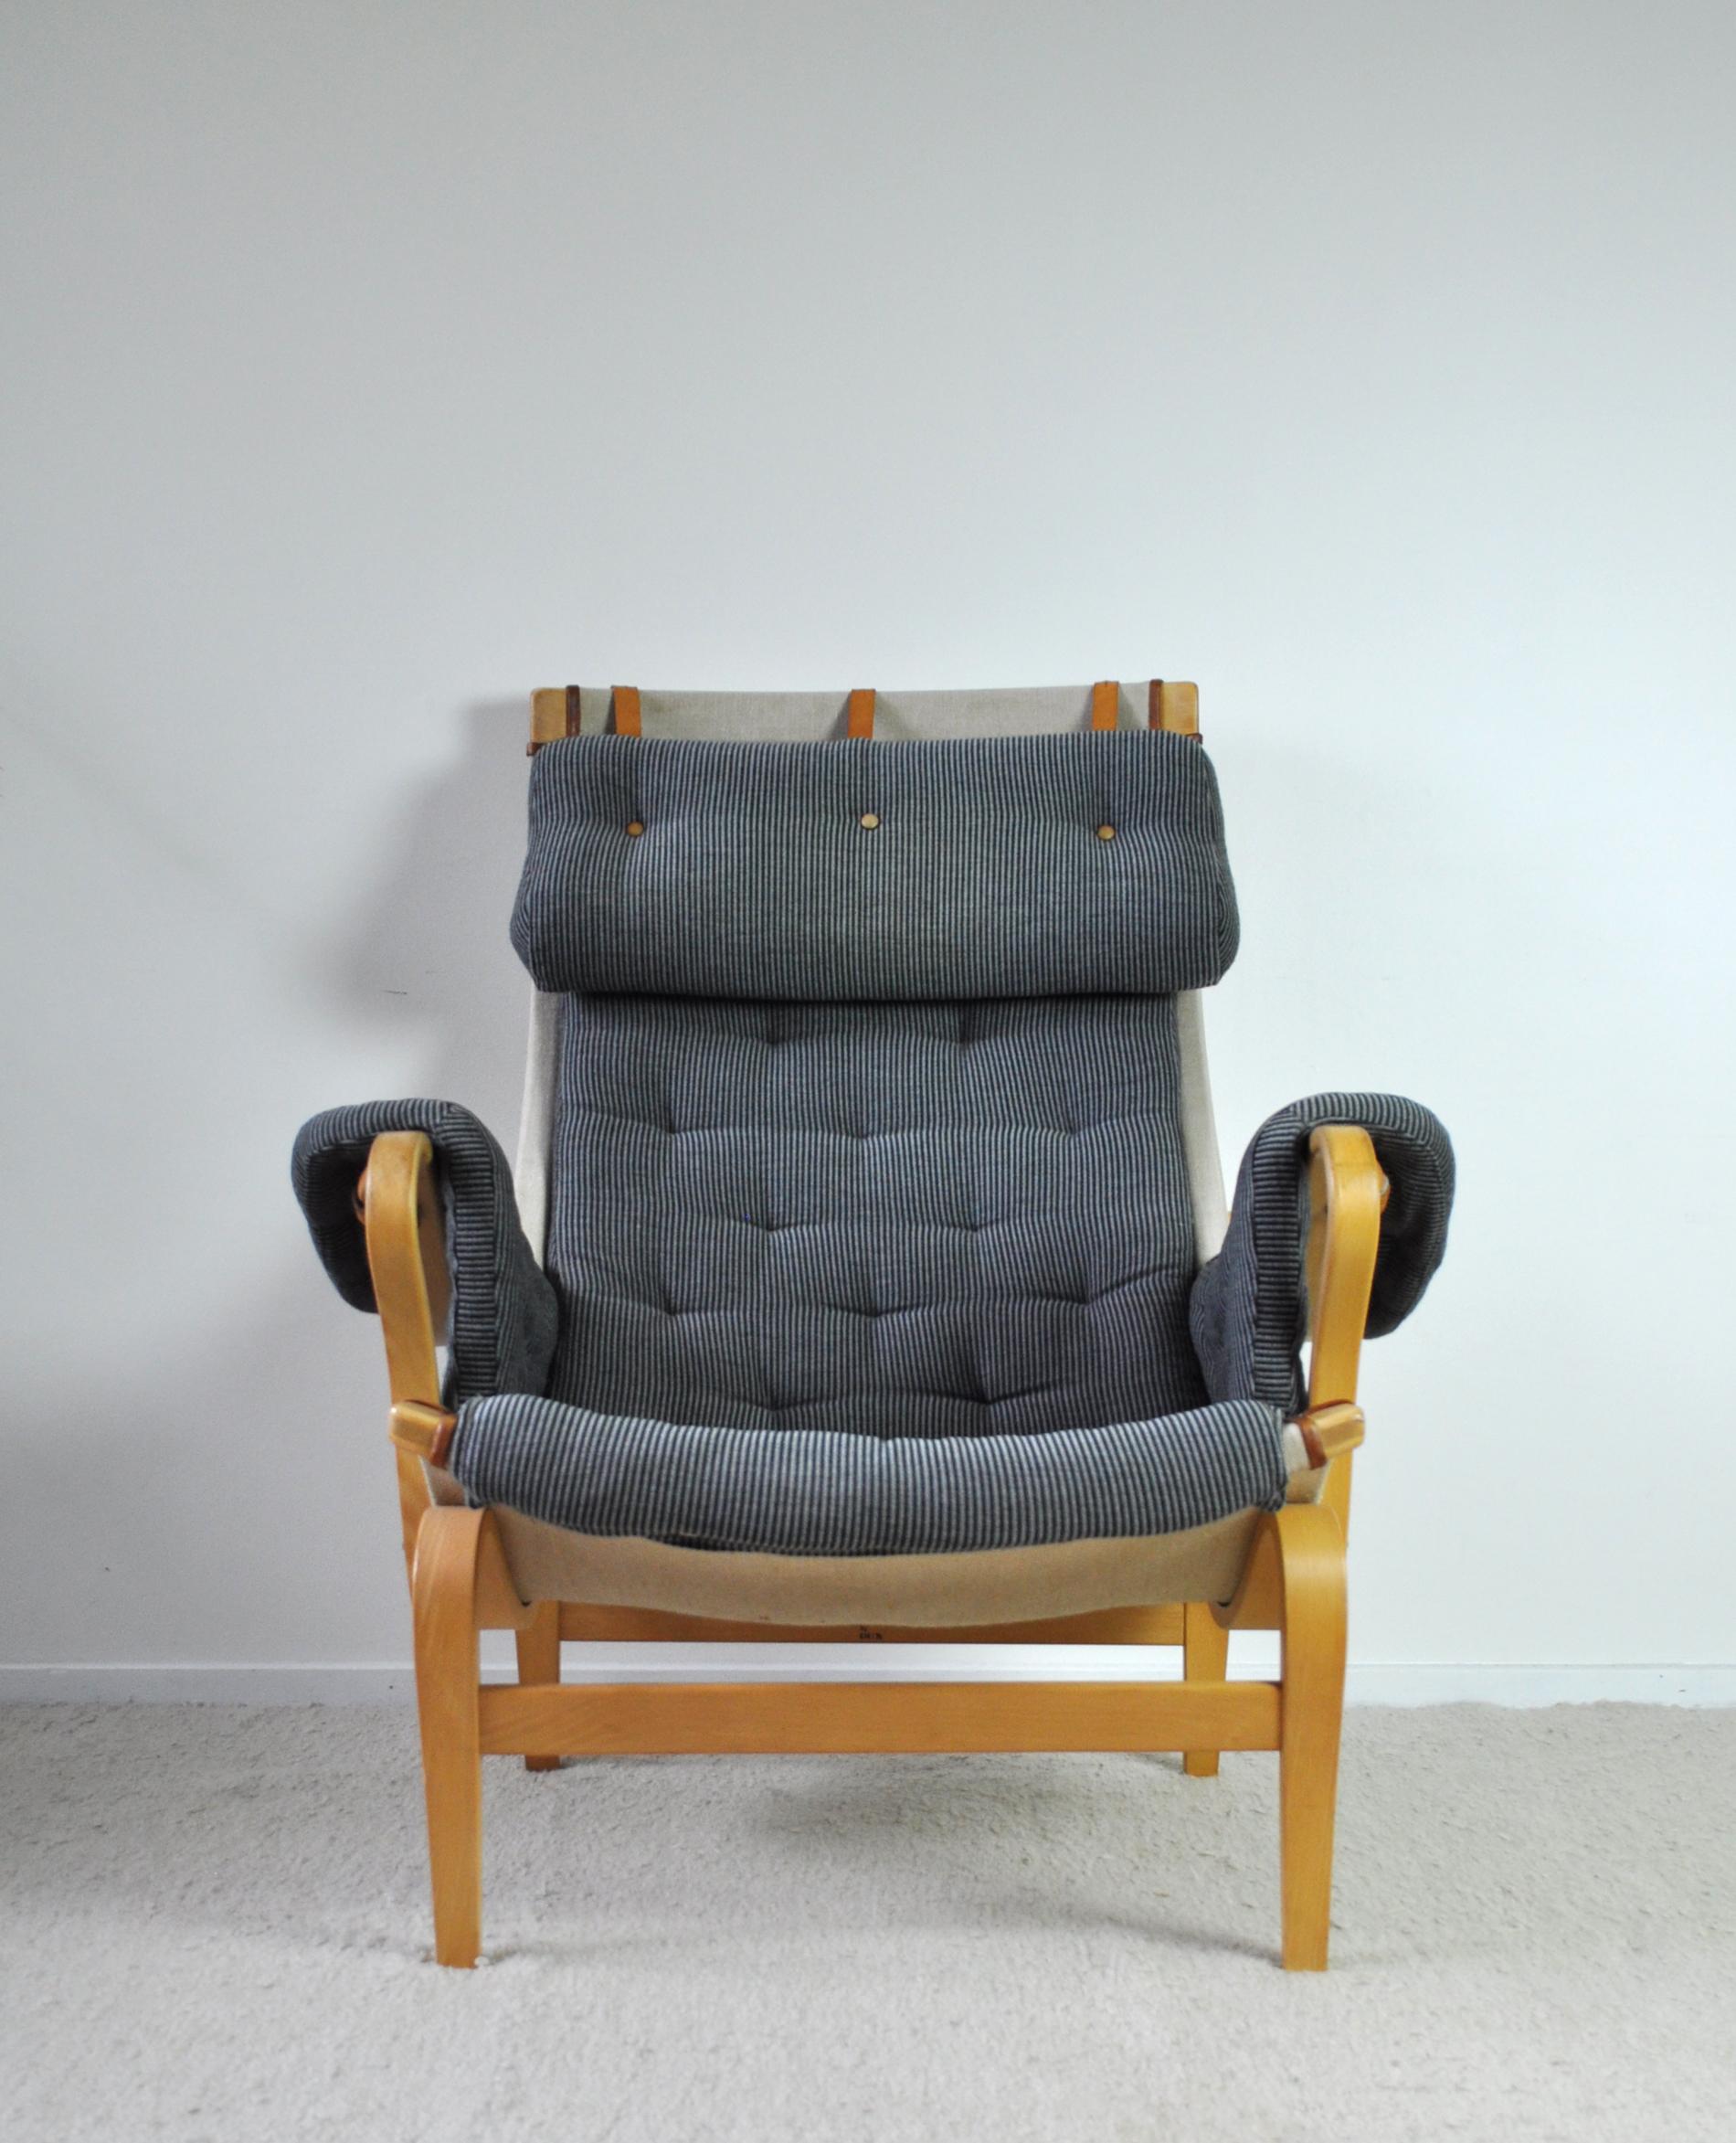 Comfortable Pernilla armchair designed by Bruno Mathsson. The first version was designed in 1944. This is an improved version designed for DUX in 1969. It comes with frame of moulded beech stretched with canvas and original fabric in a good vintage